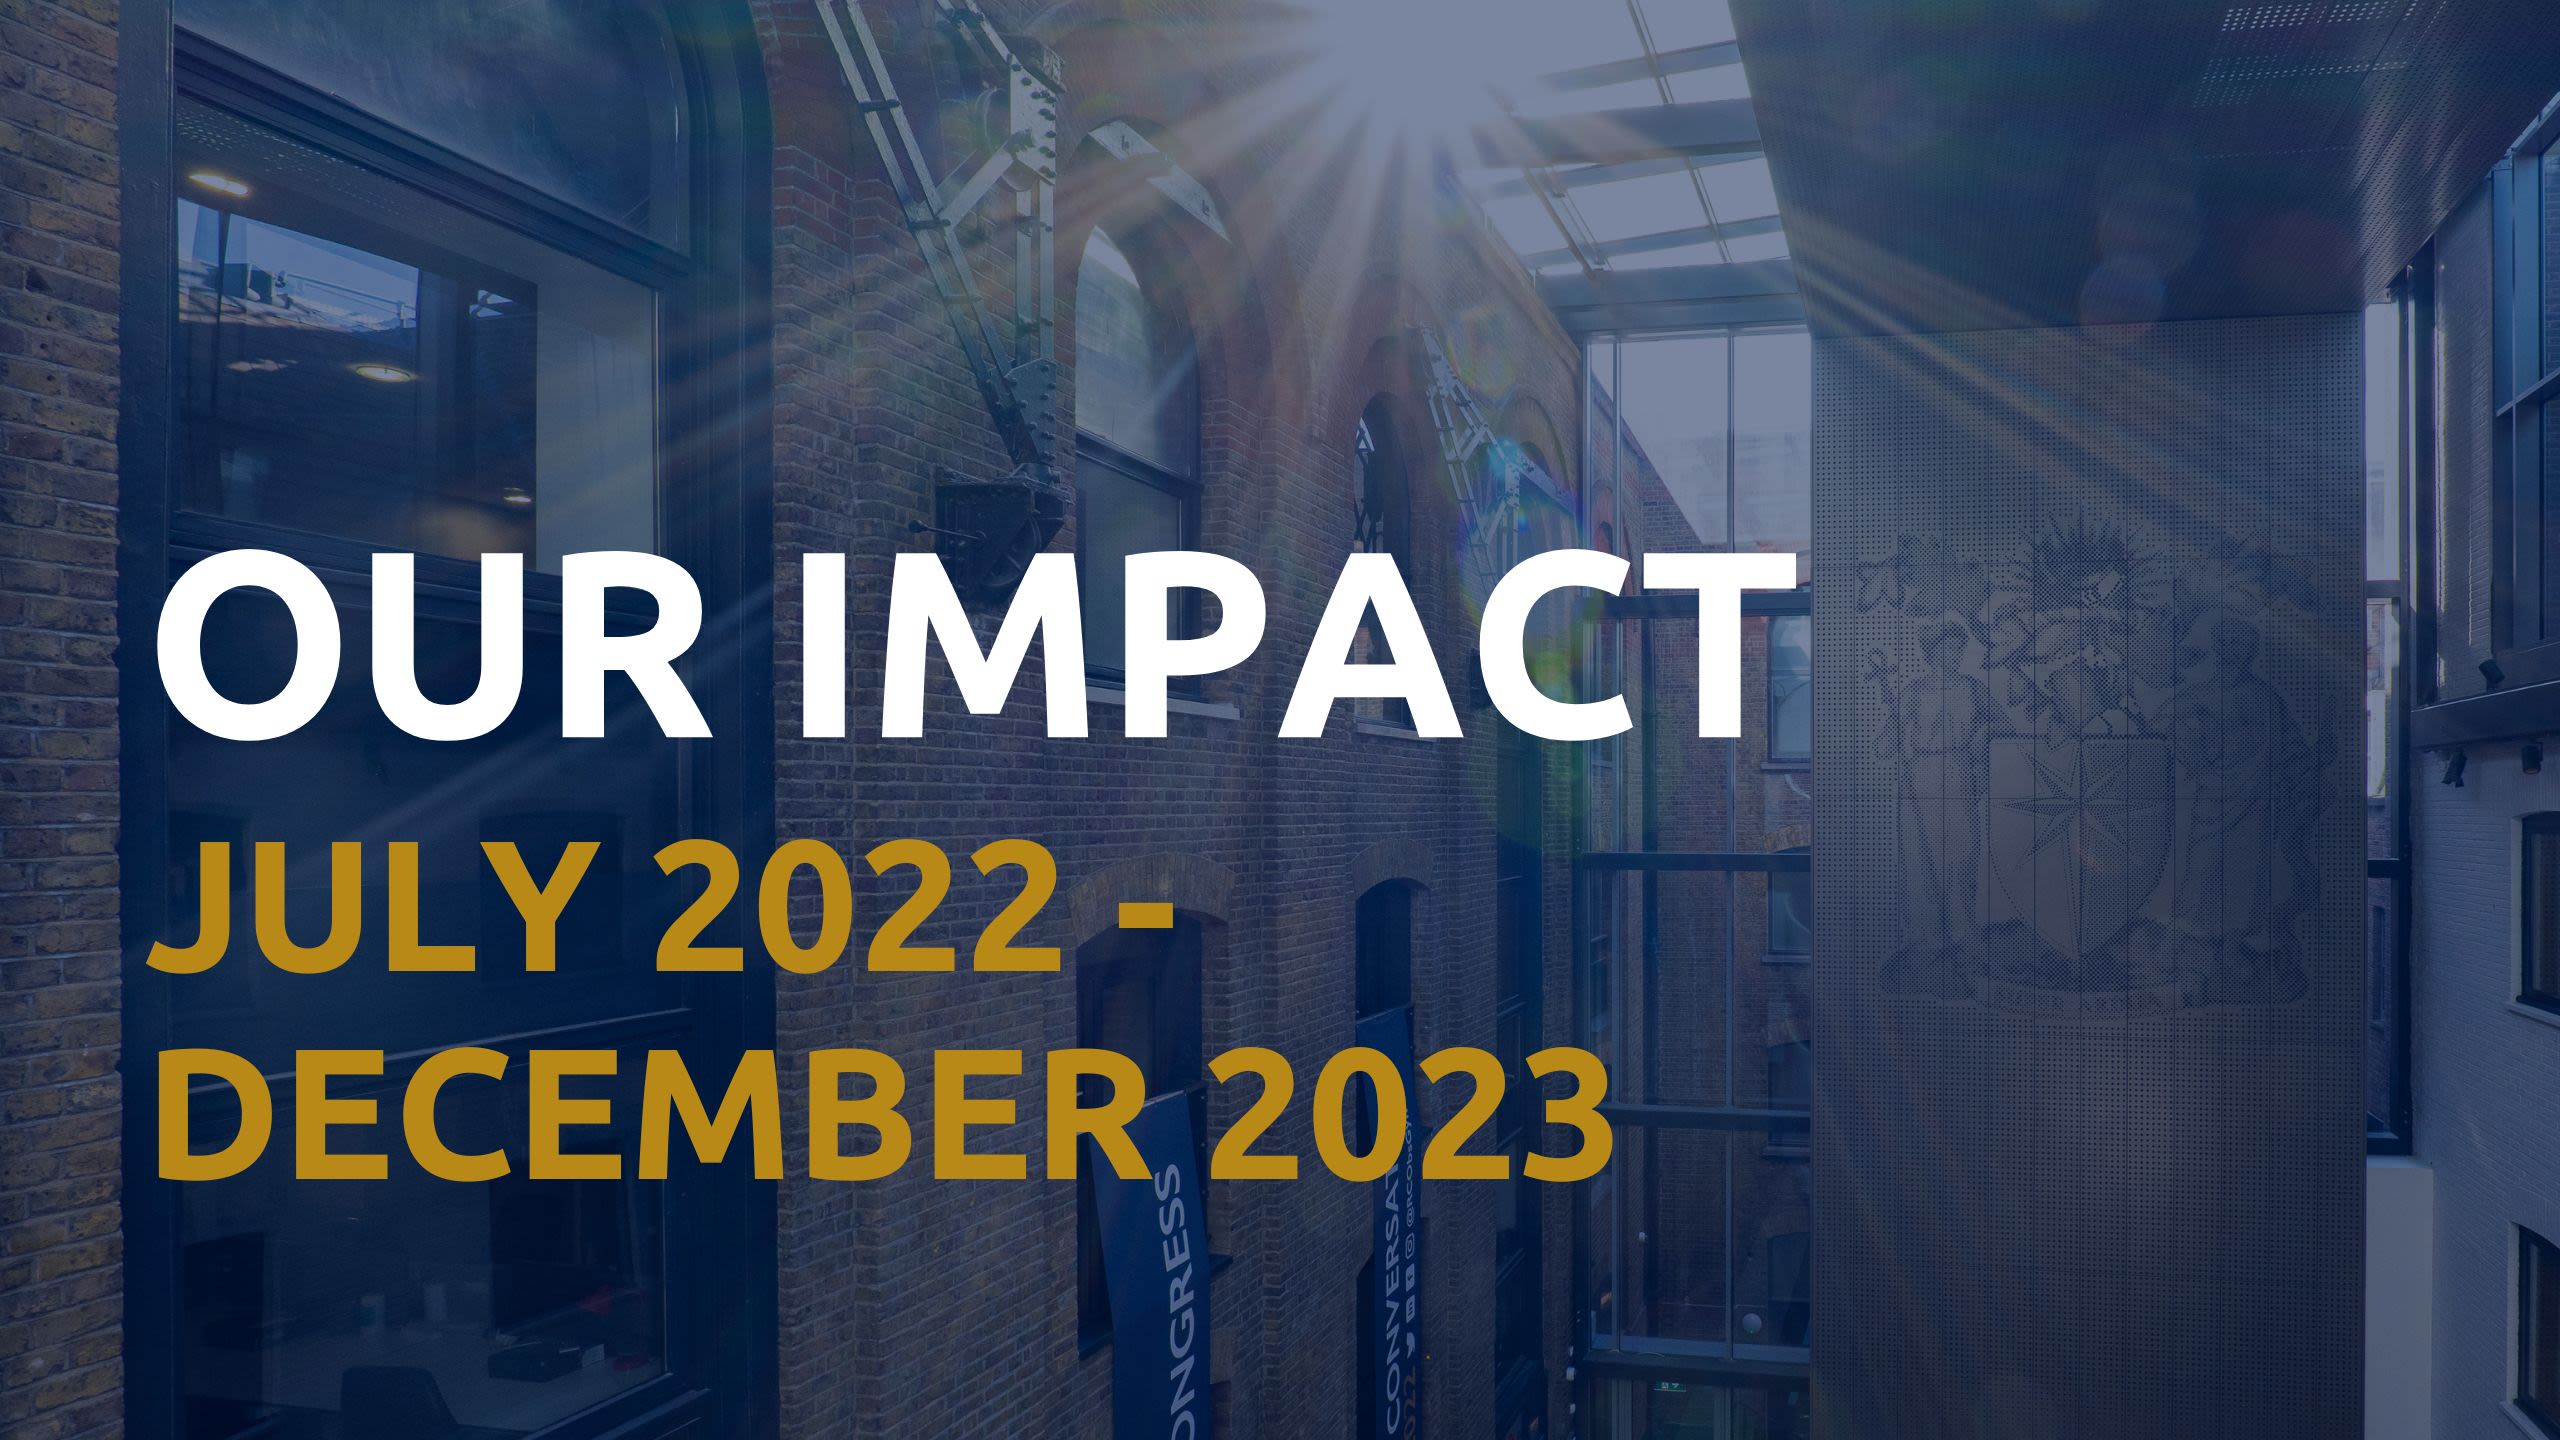 A photo of the RCOG building with a title which reads: Our impact, July 2022 to December 2023